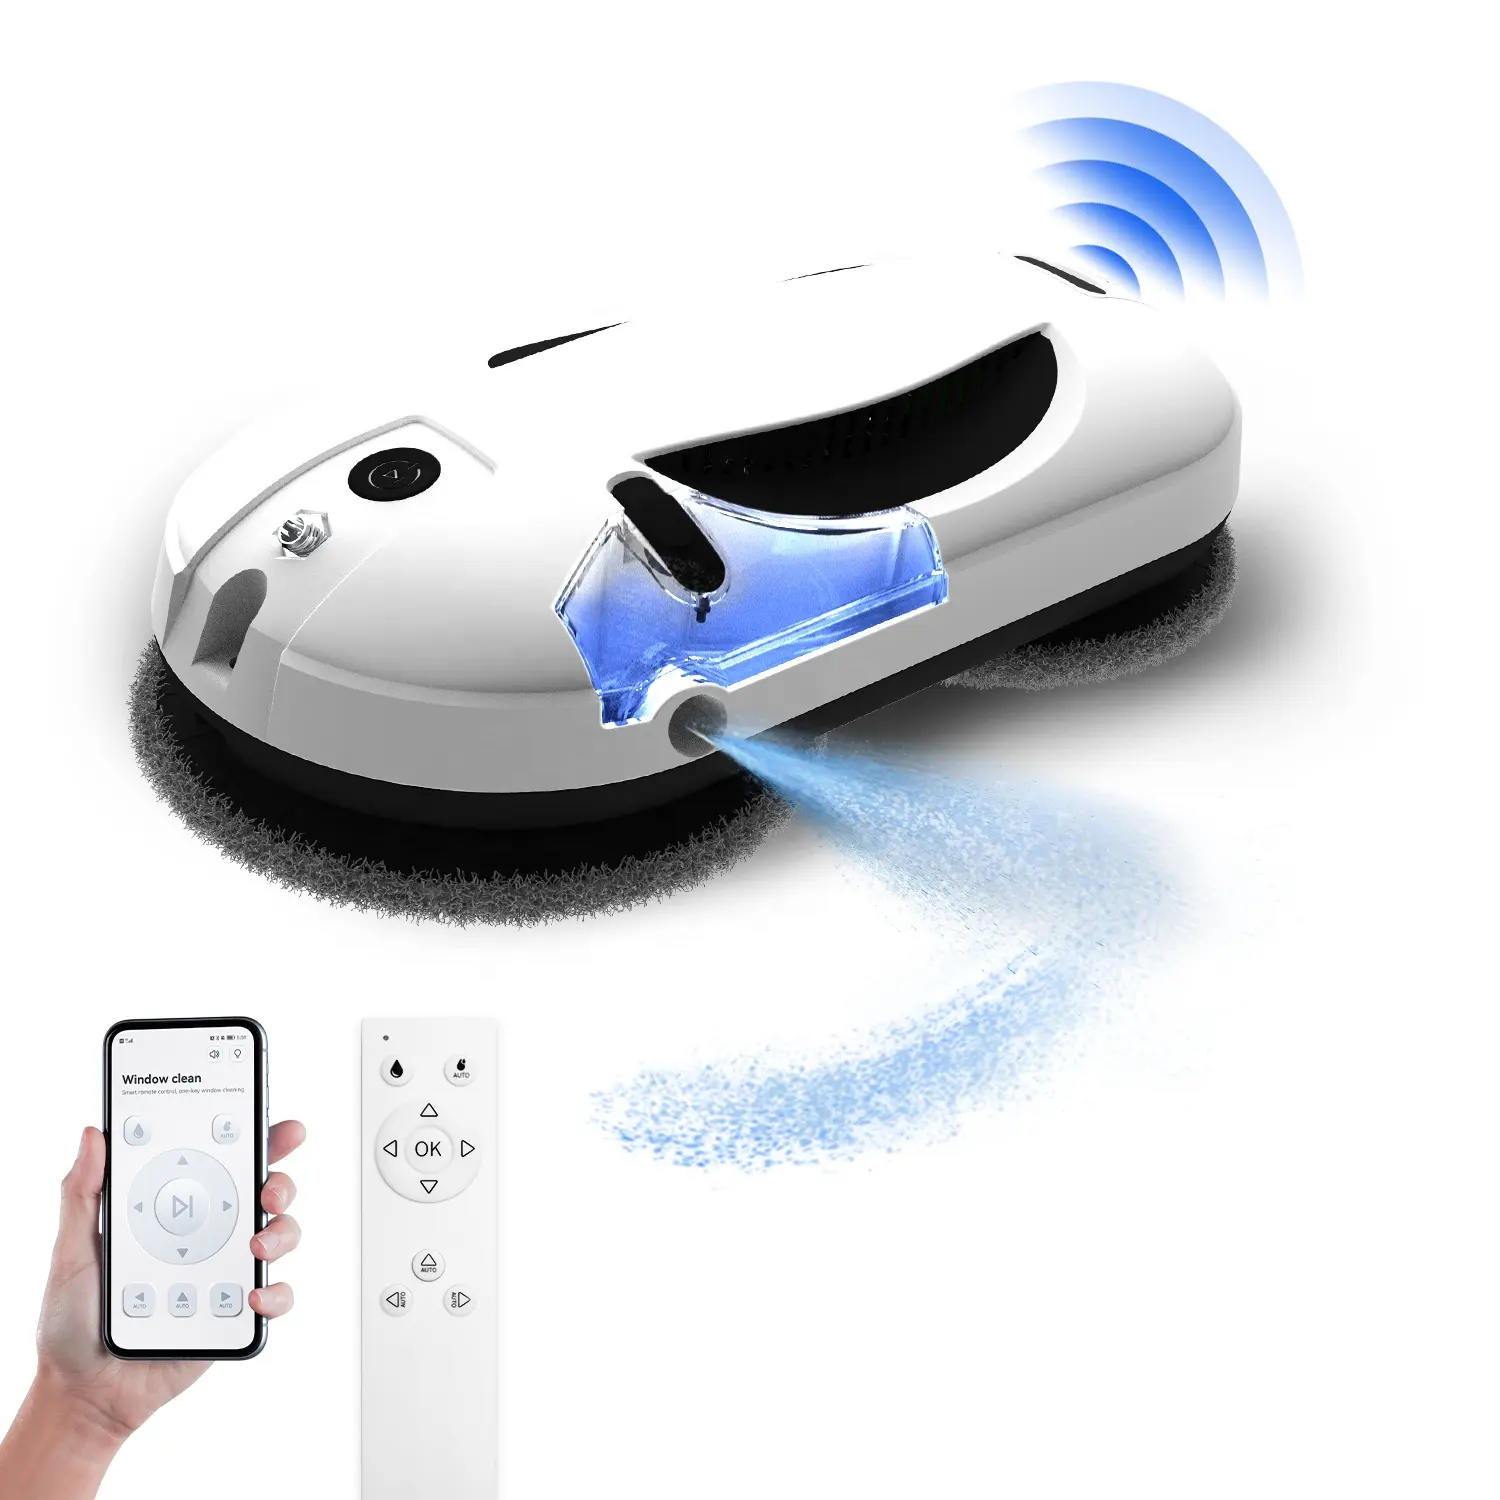 Auto spray water window cleaning robot vacuum electric clean wall glass cleaner with app control